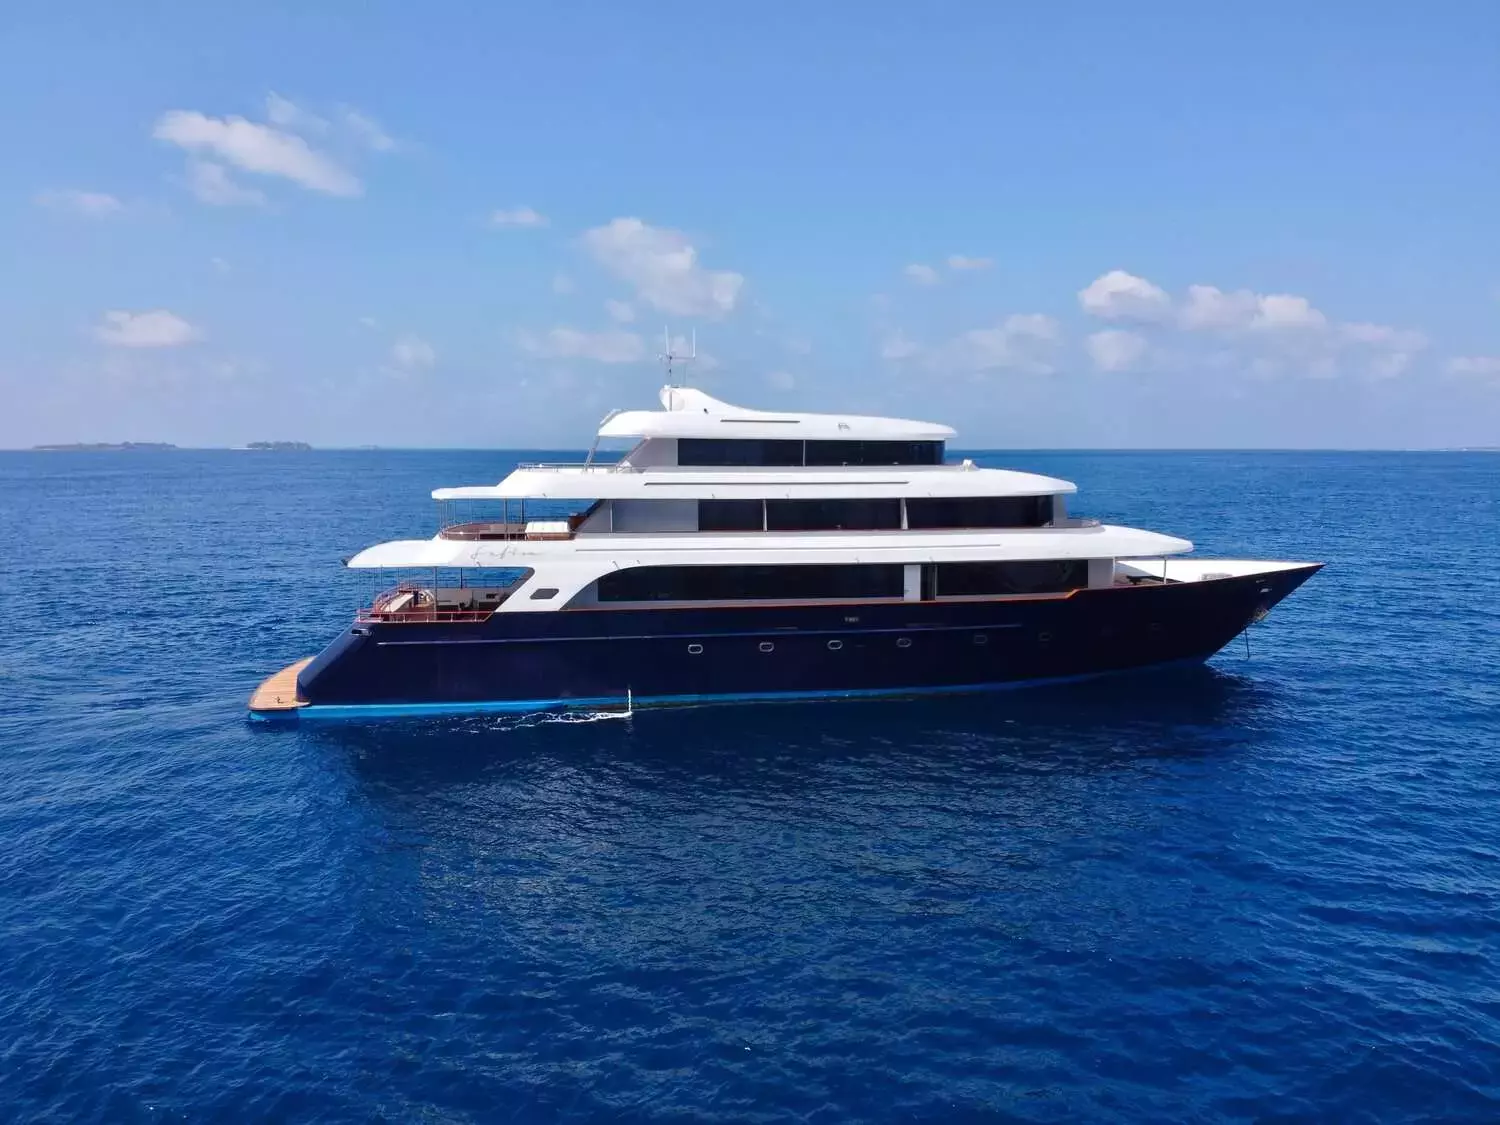 Safira by Custom Made - Top rates for a Charter of a private Superyacht in Maldives